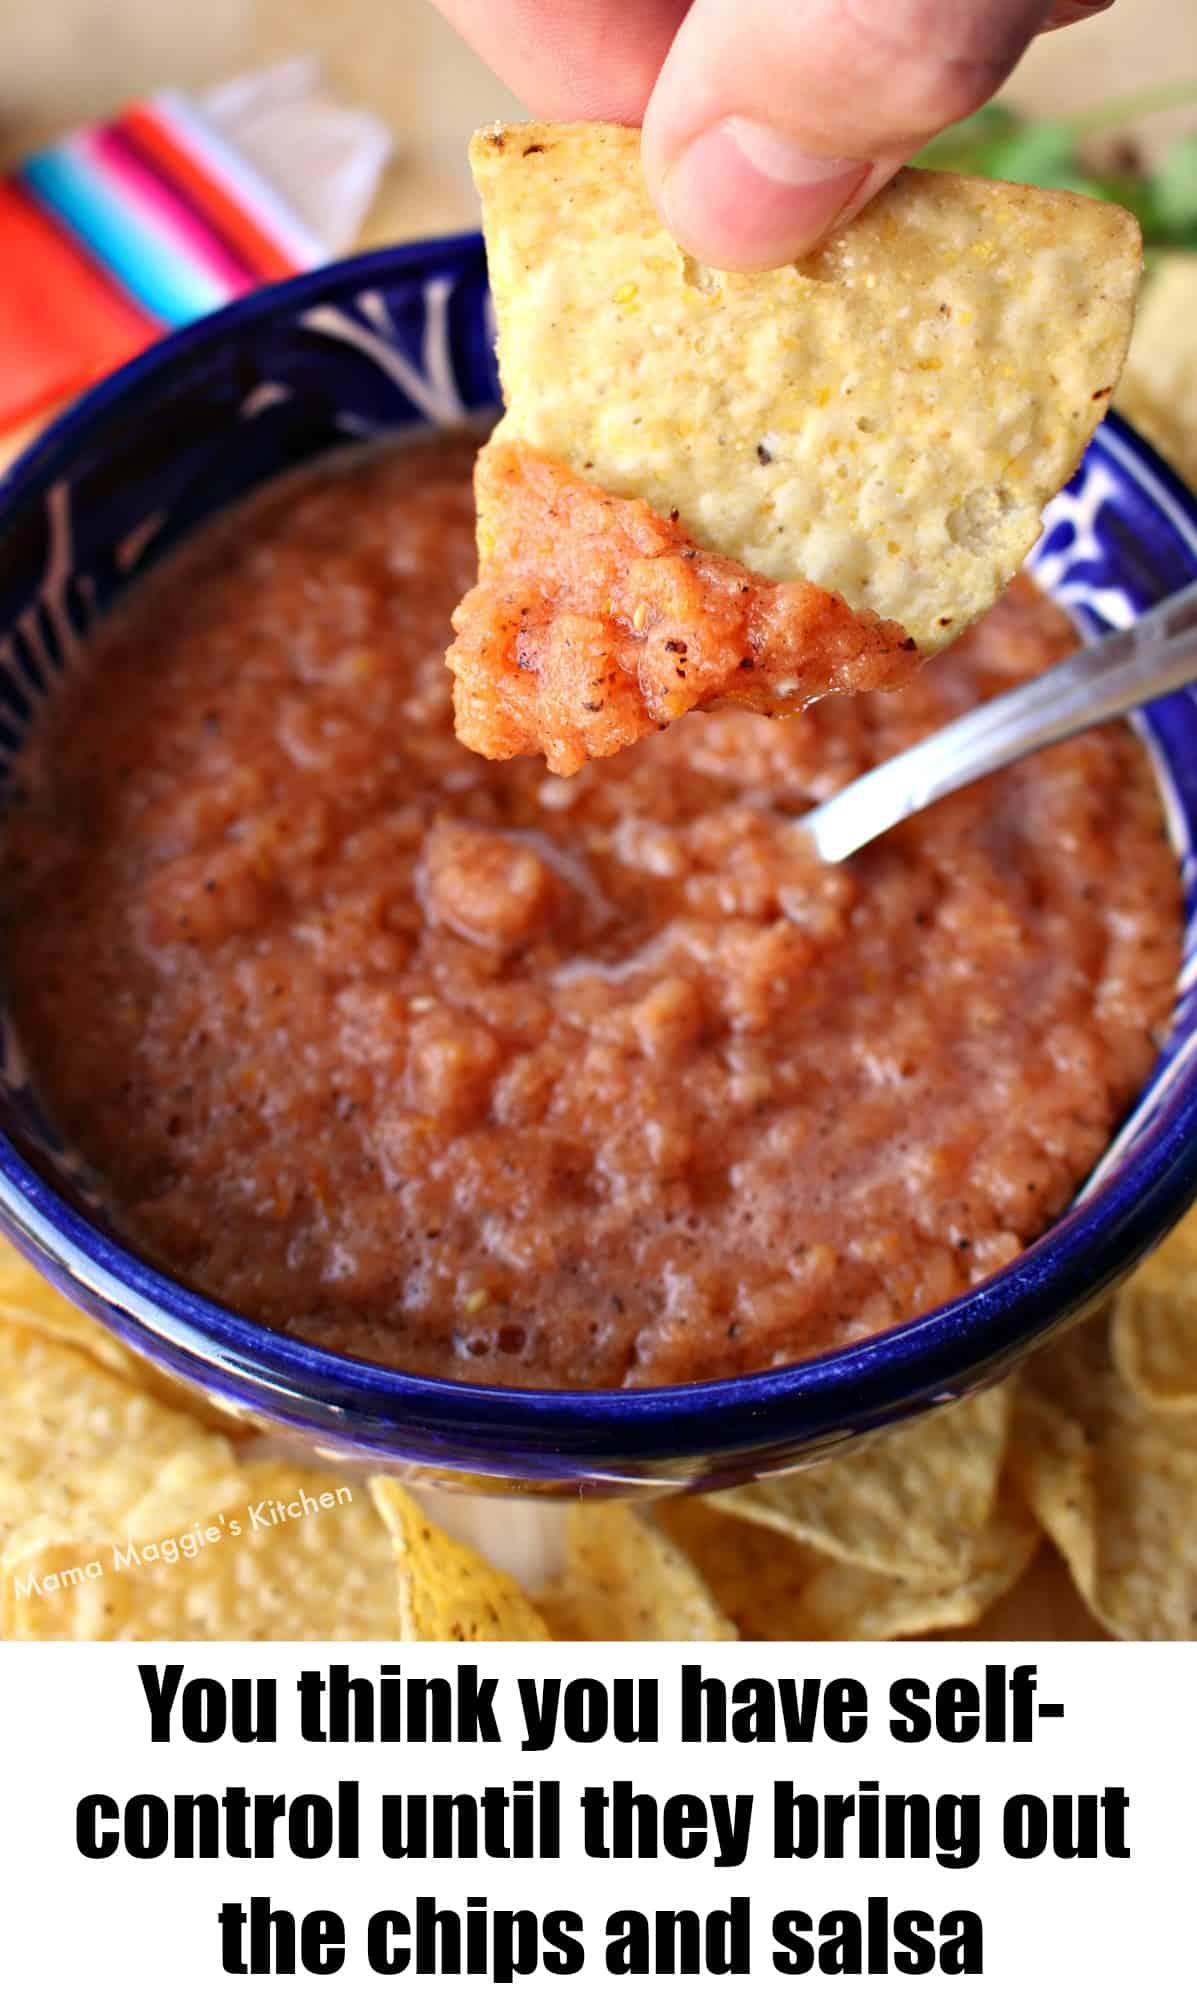 A hand holding a chip with salsa.